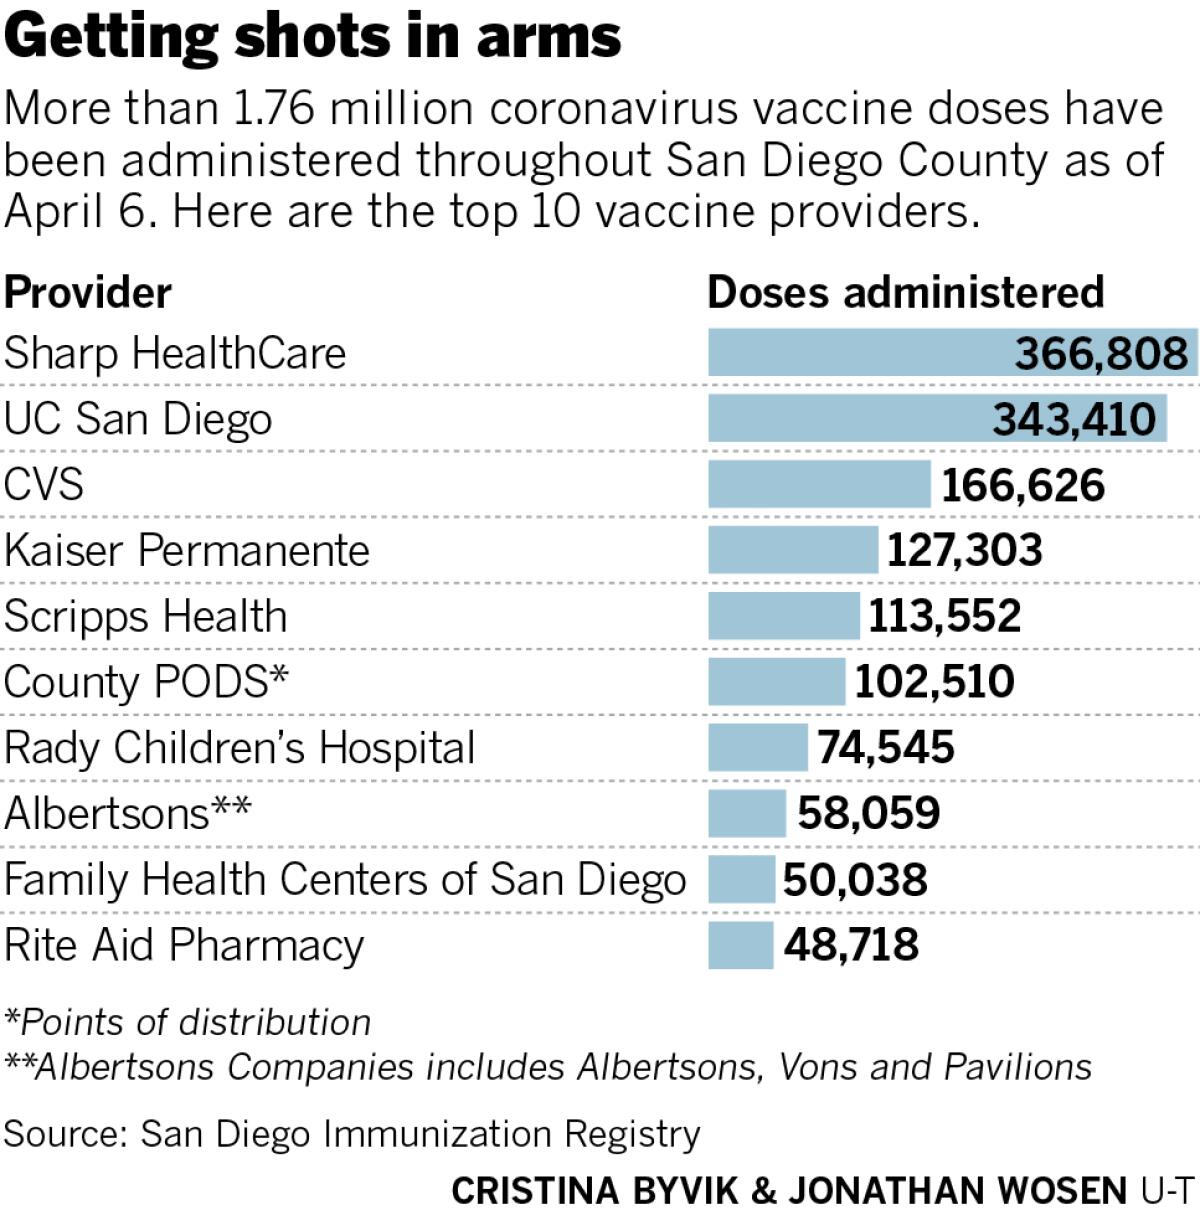 COVID vaccine doses administered by San Diego providers